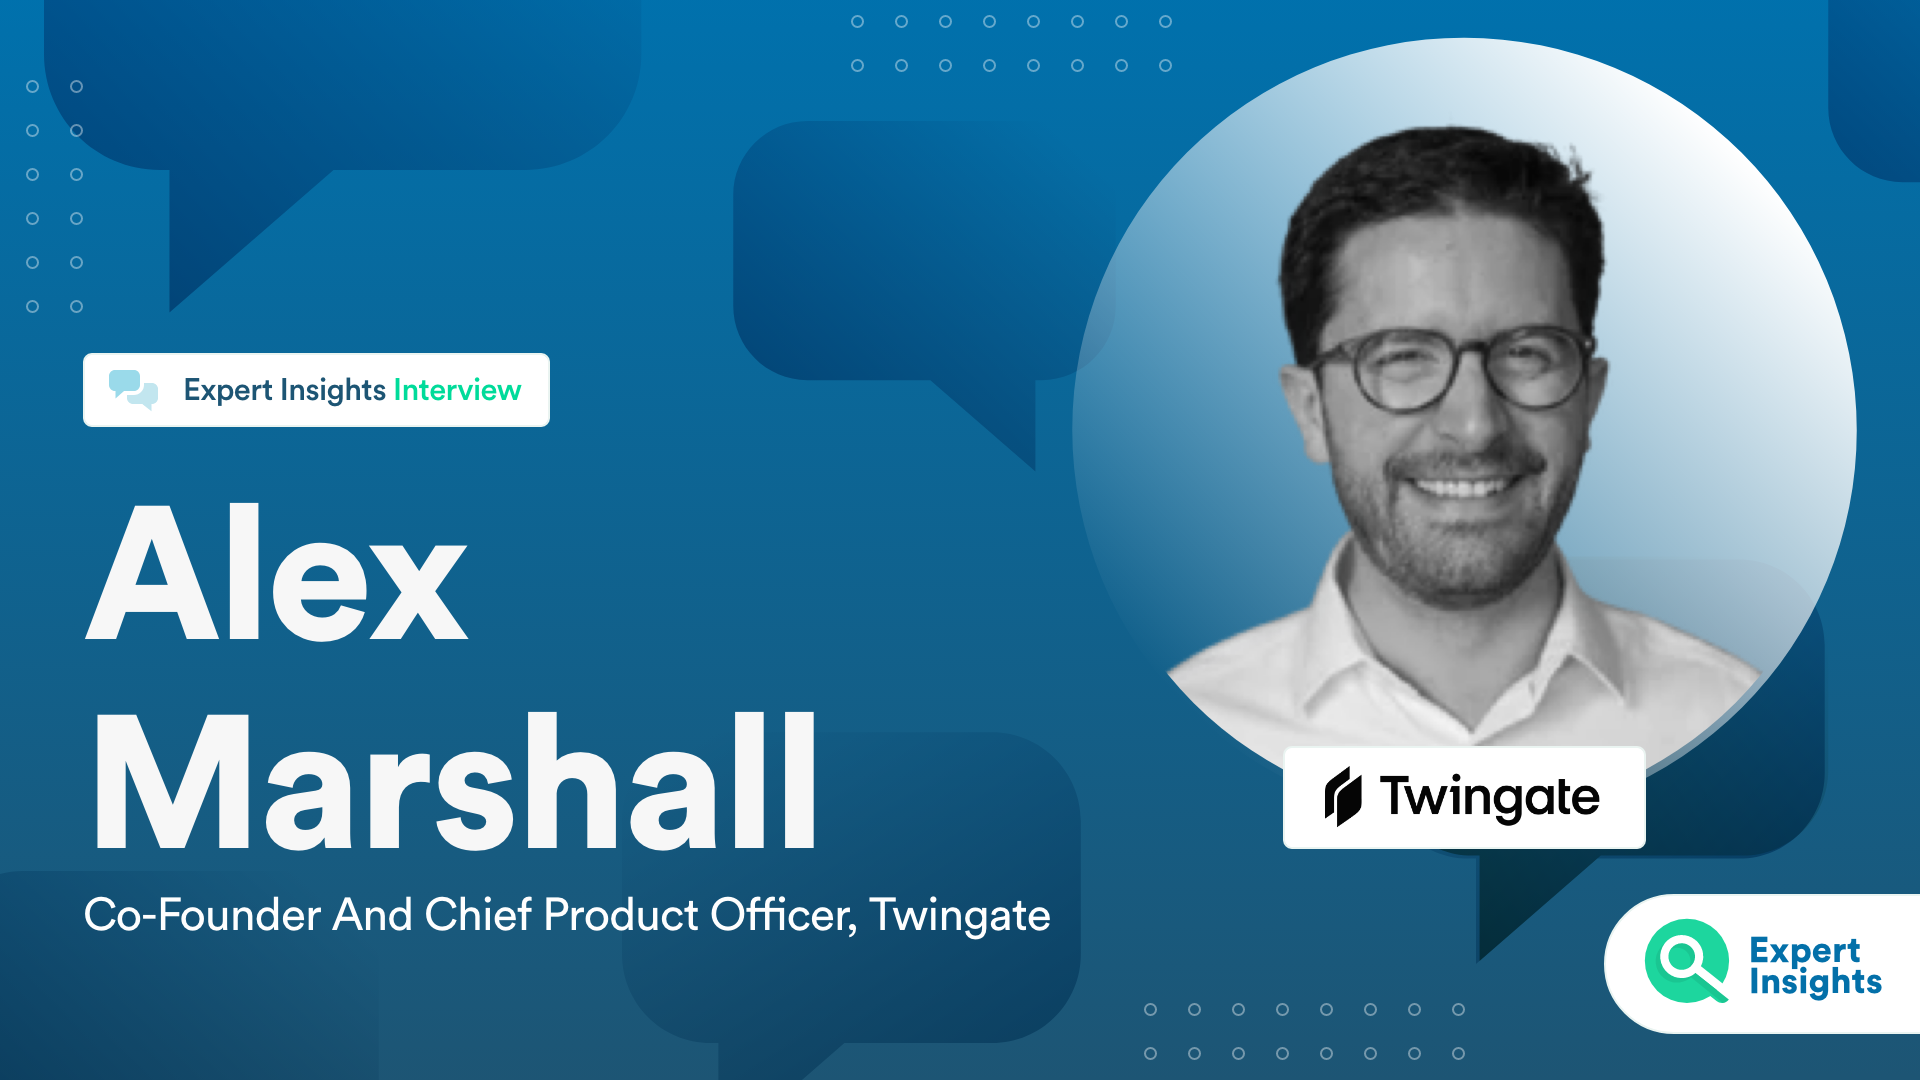 Alex Marshall, Co-Founder And Chief Product Officer At Twingate